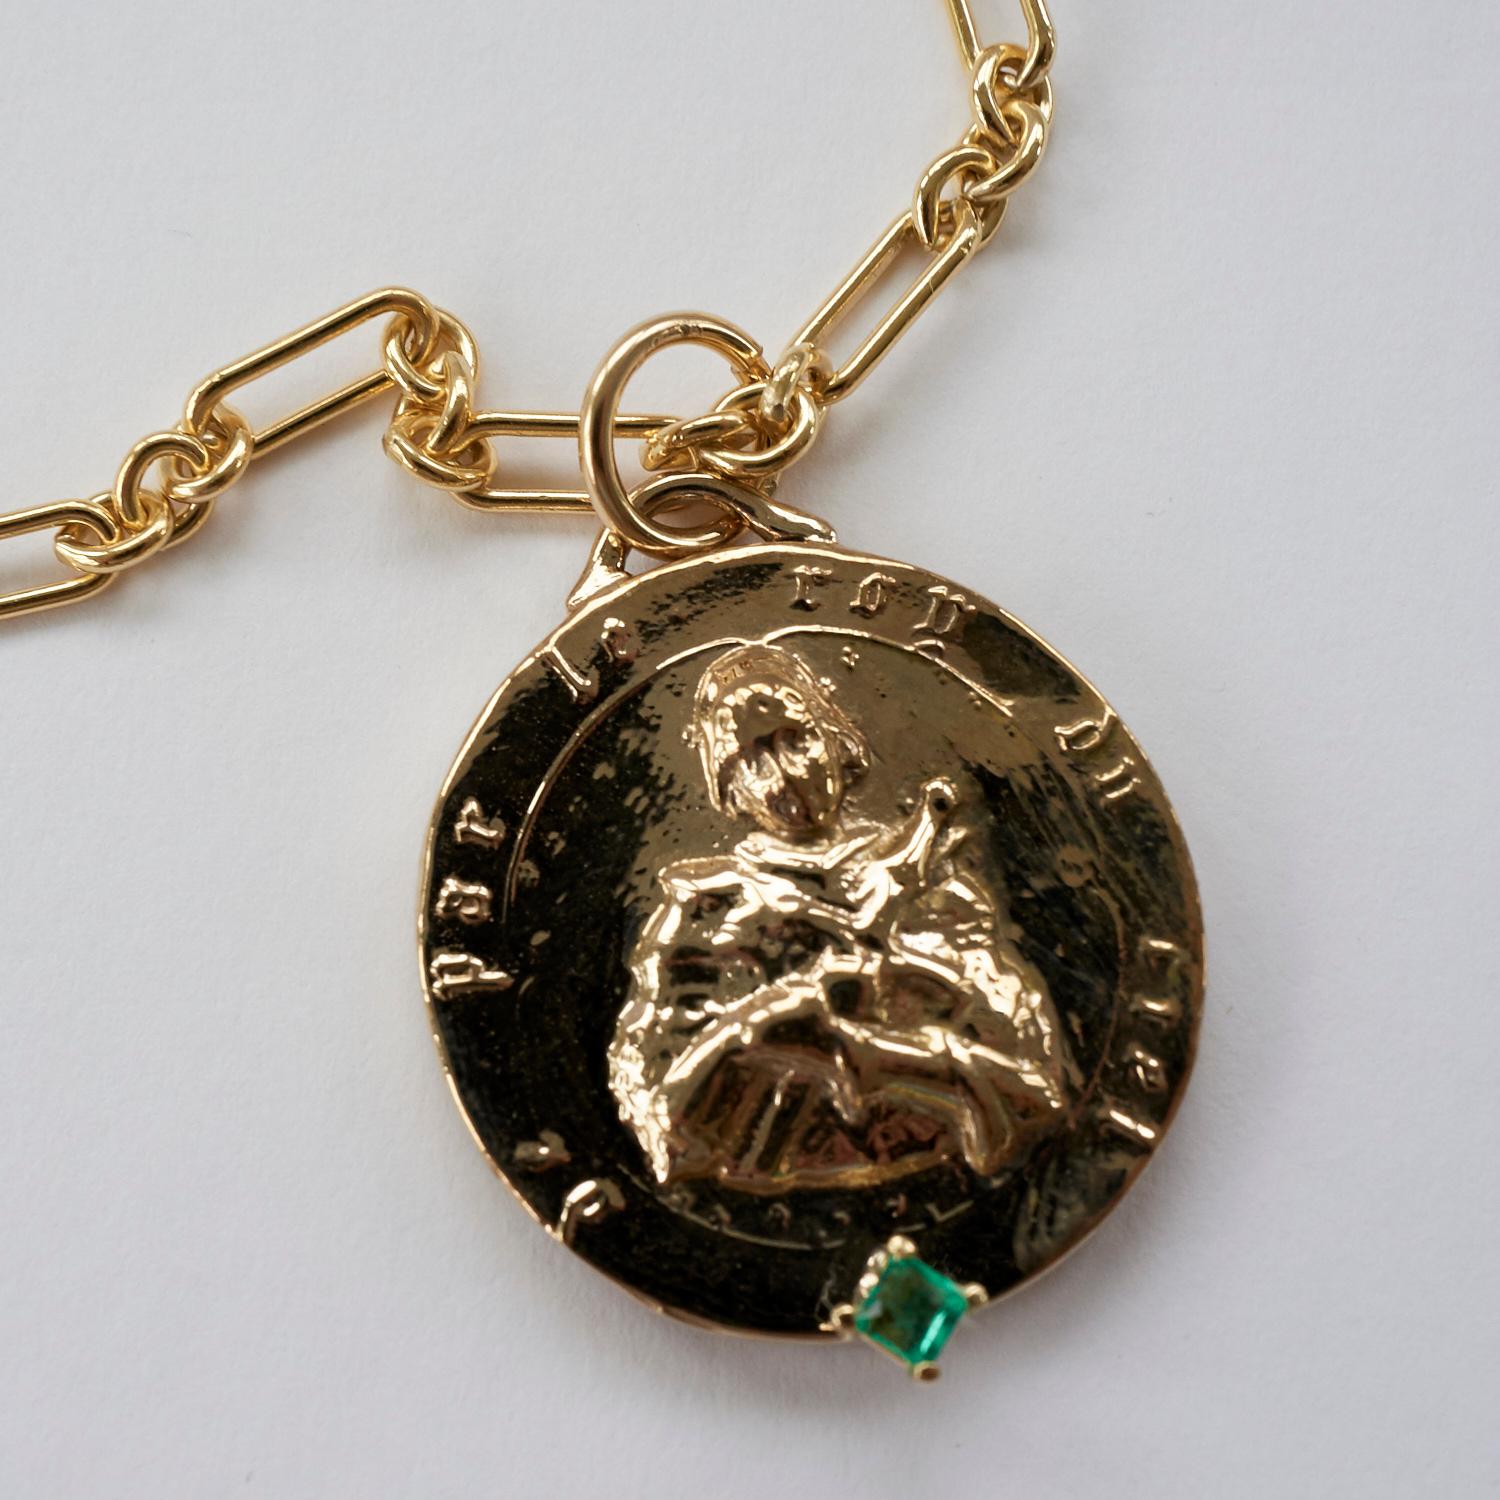 Brilliant Cut White Diamond Chain Necklace Medal Coin Pendant Joan of Arc J Dauphin For Sale